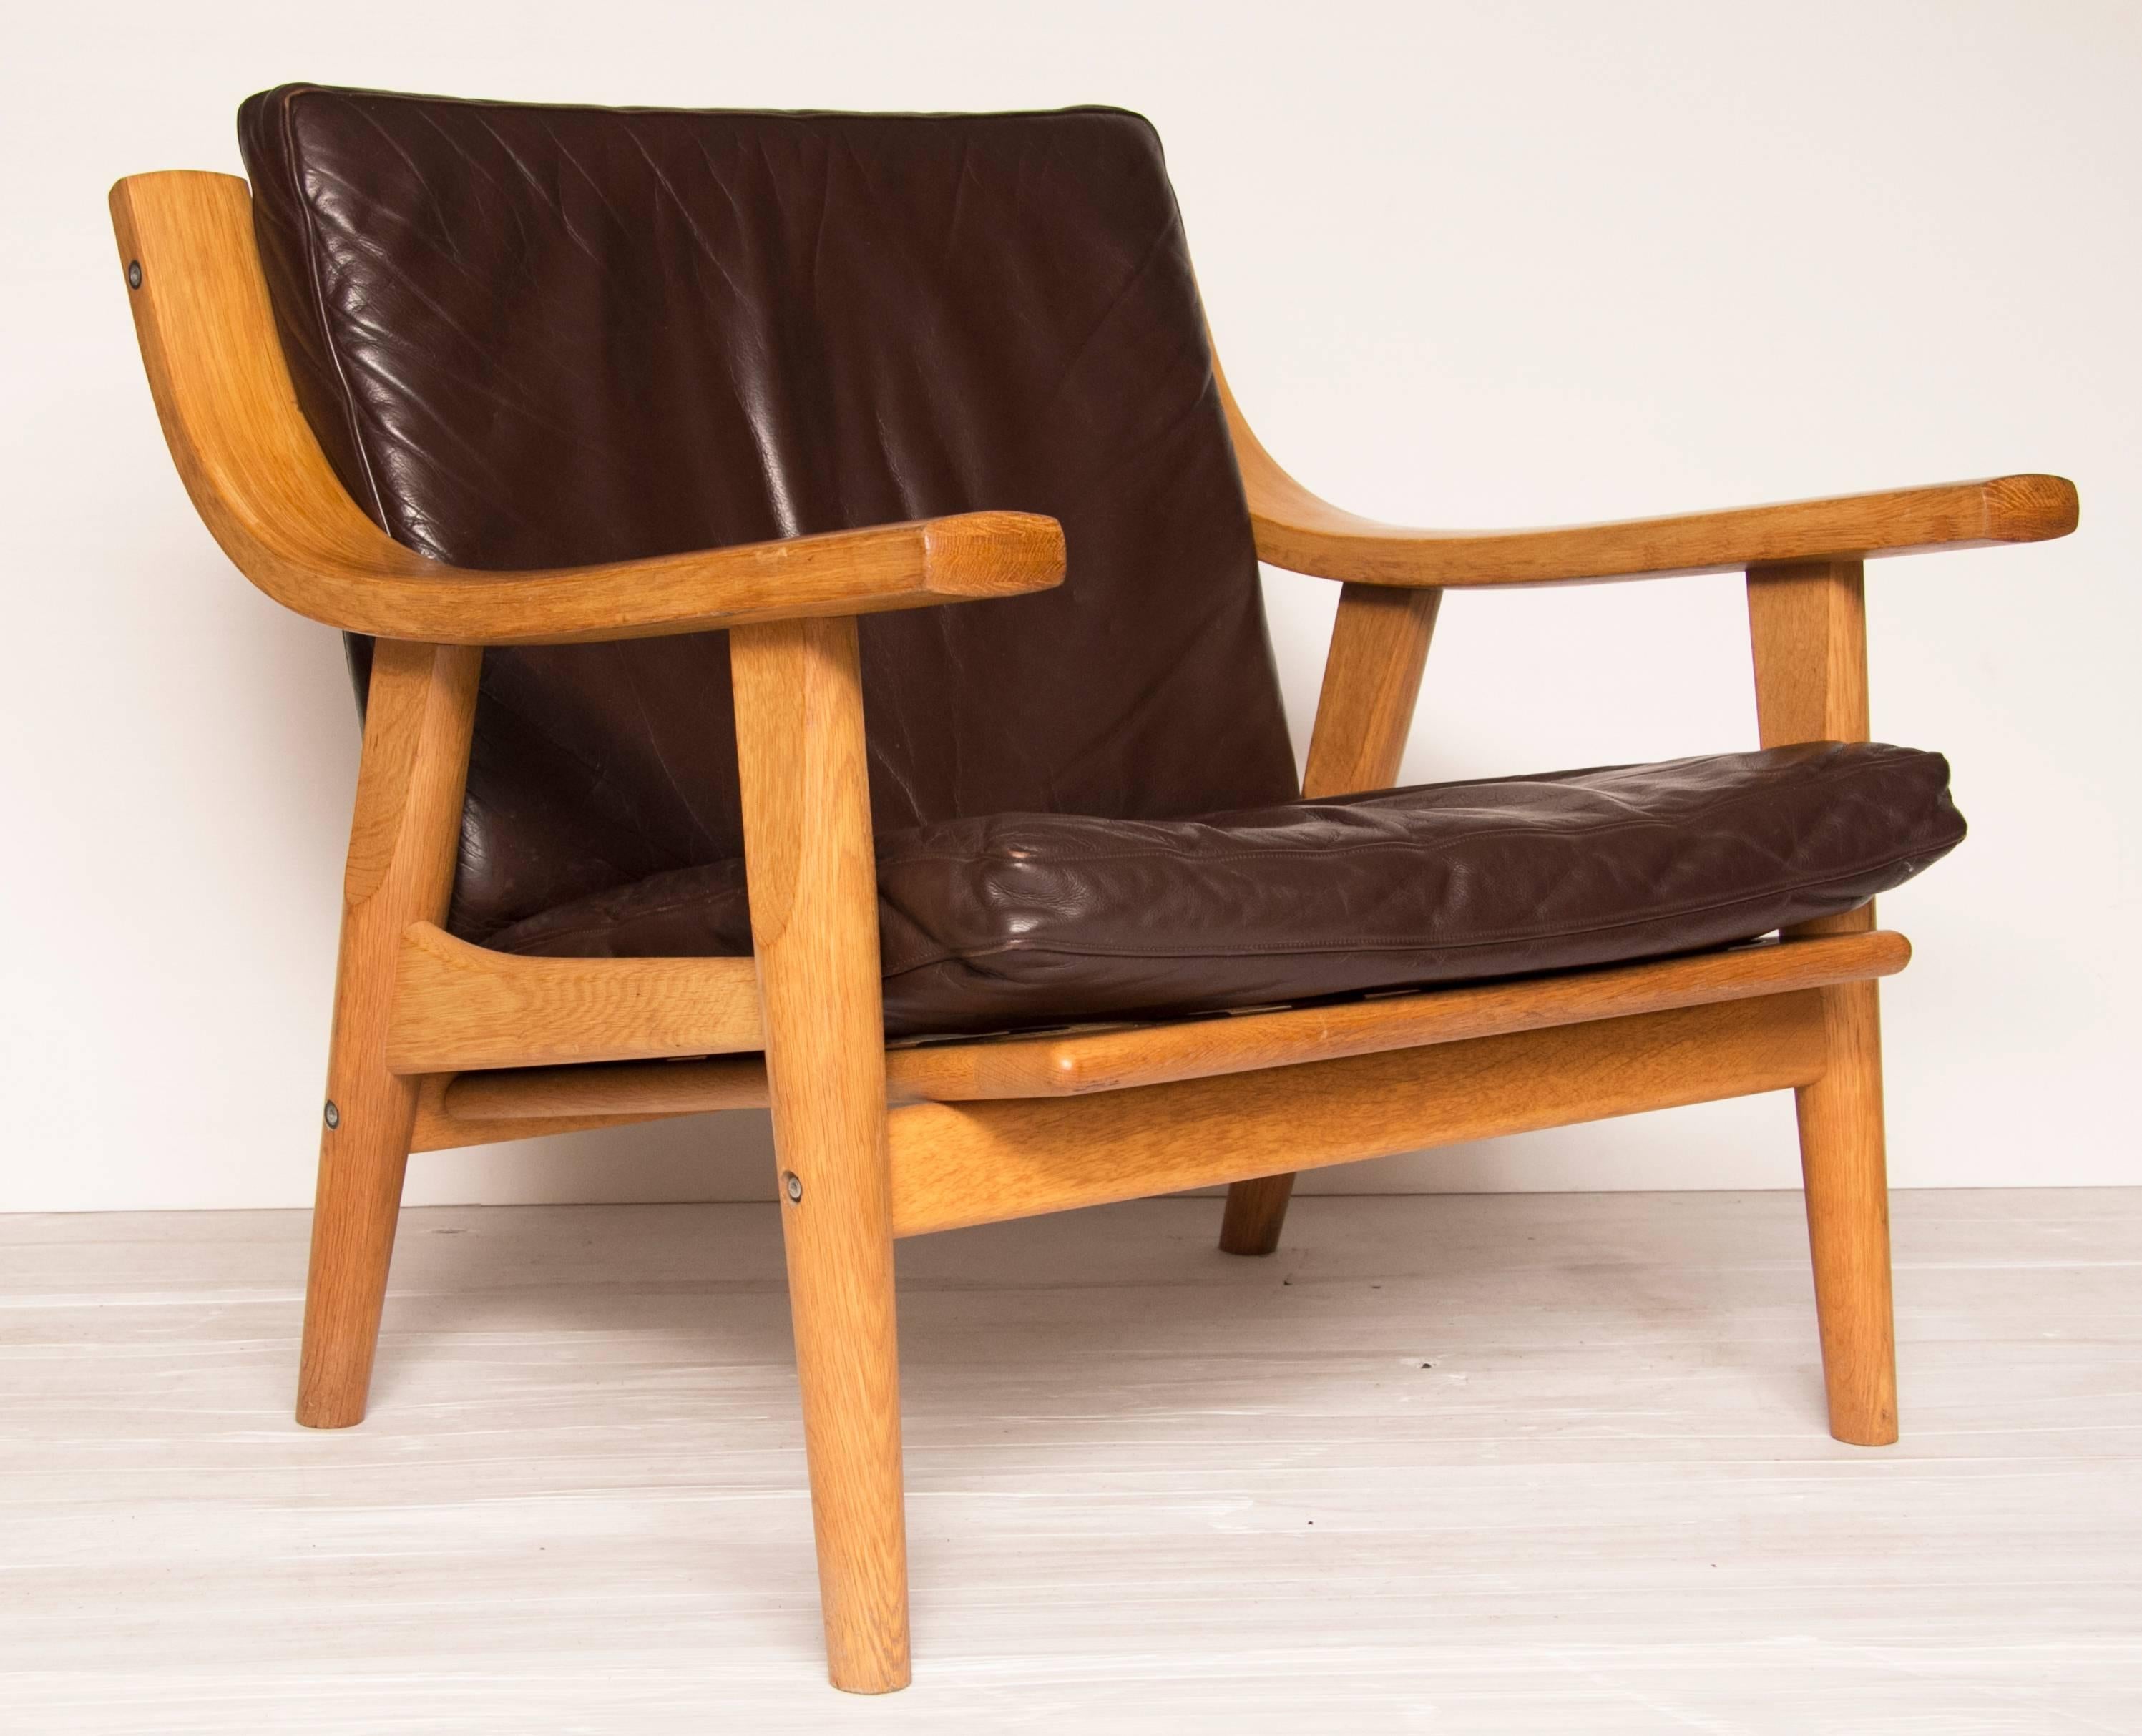 Hans Wegner GE530 oak and brown leather lounge chair. A superbly designed very comfortable chair.